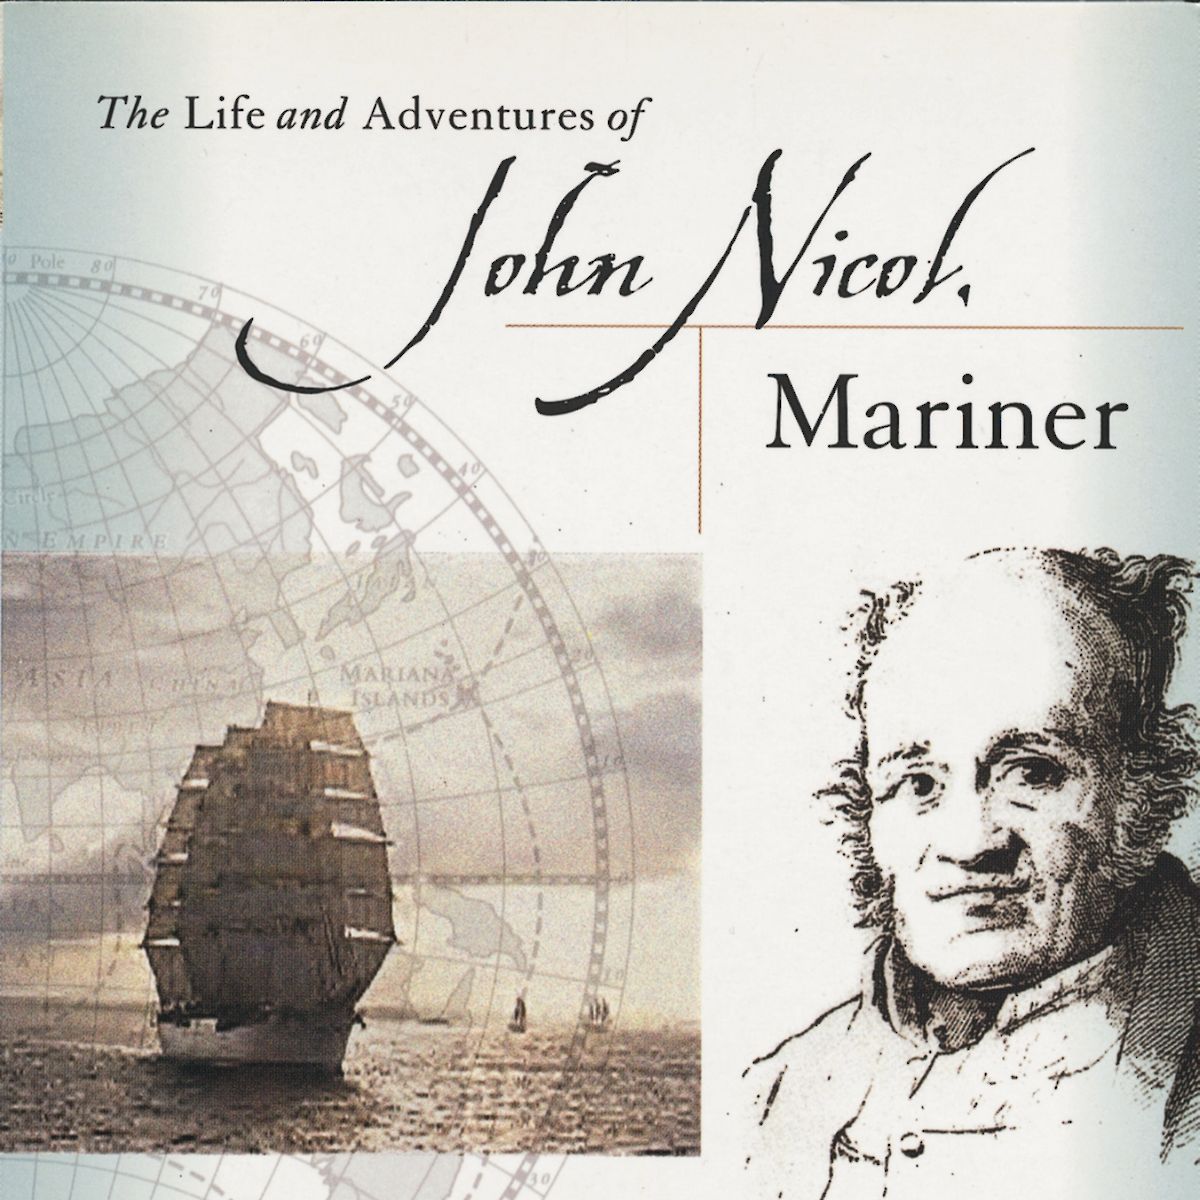 The Life And Adventures of John Nicol, Mariner by Tim Flannery ...